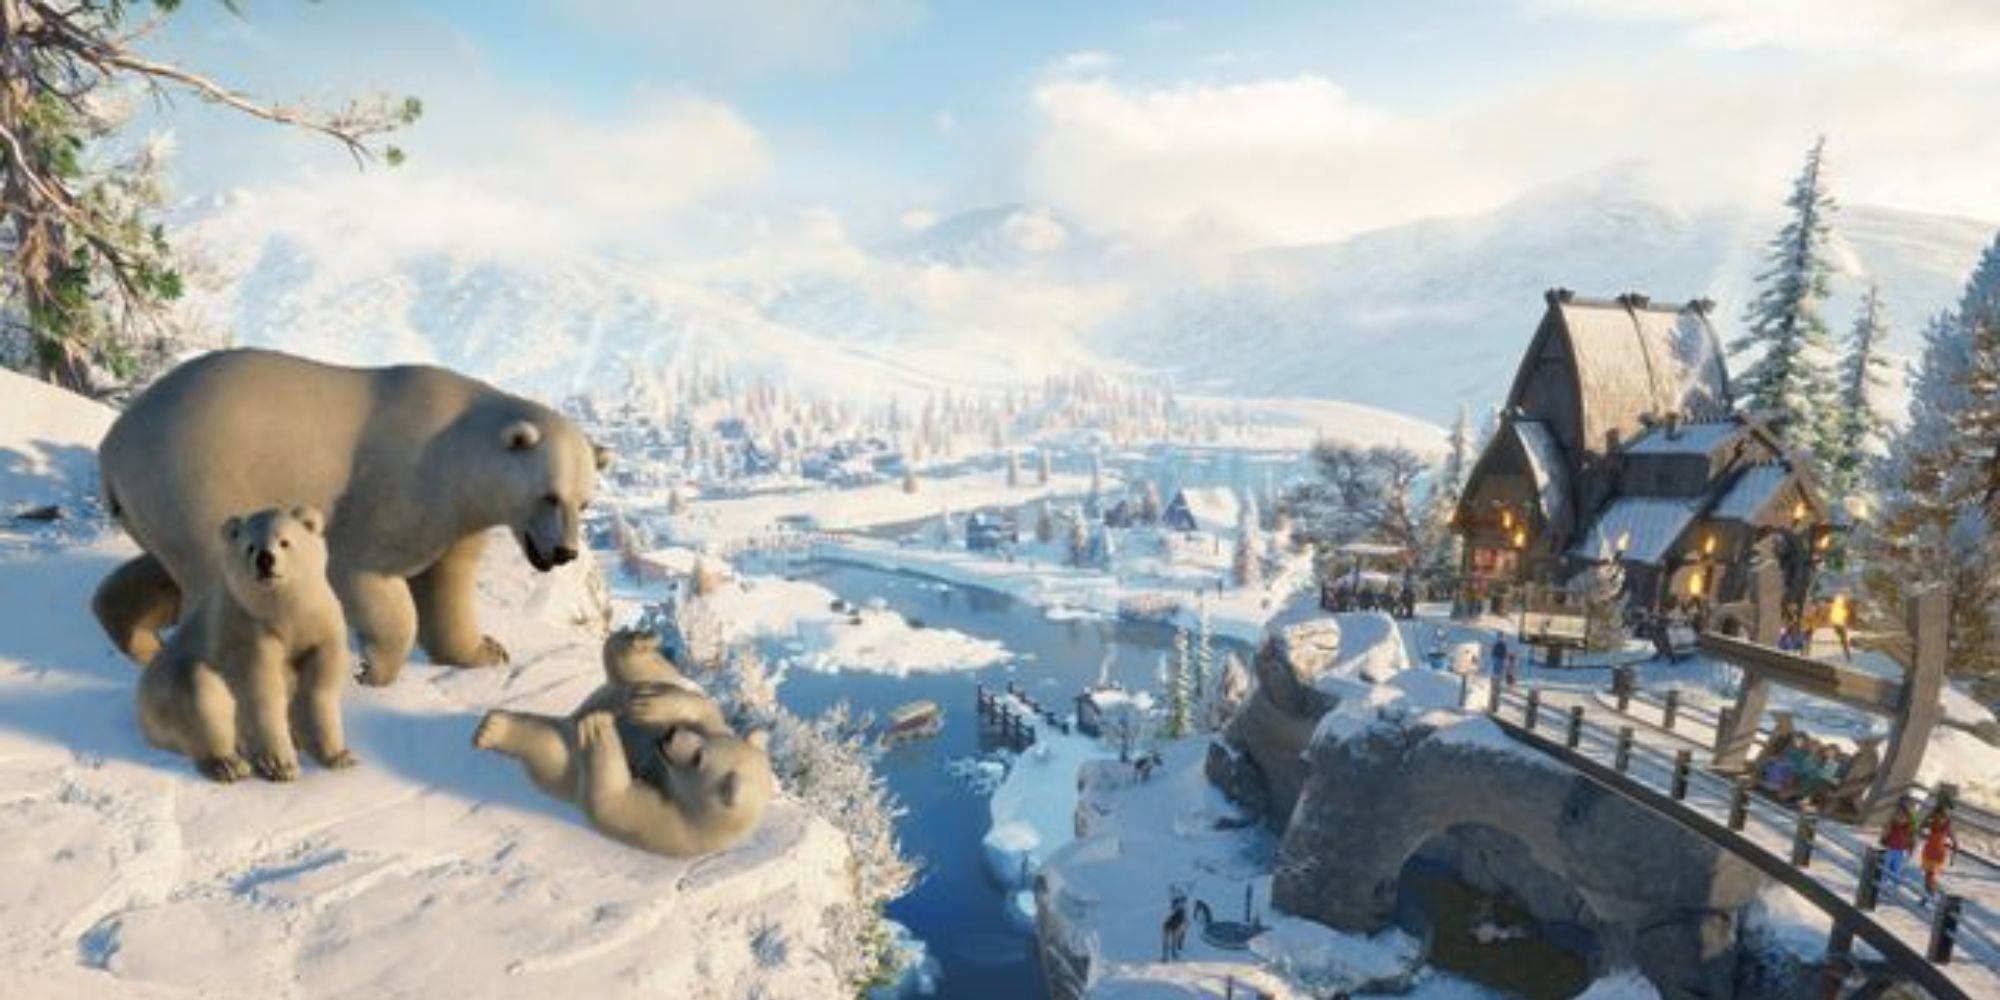 A family of polar bears overlooking icy plains and a zoo in Planet Zoo